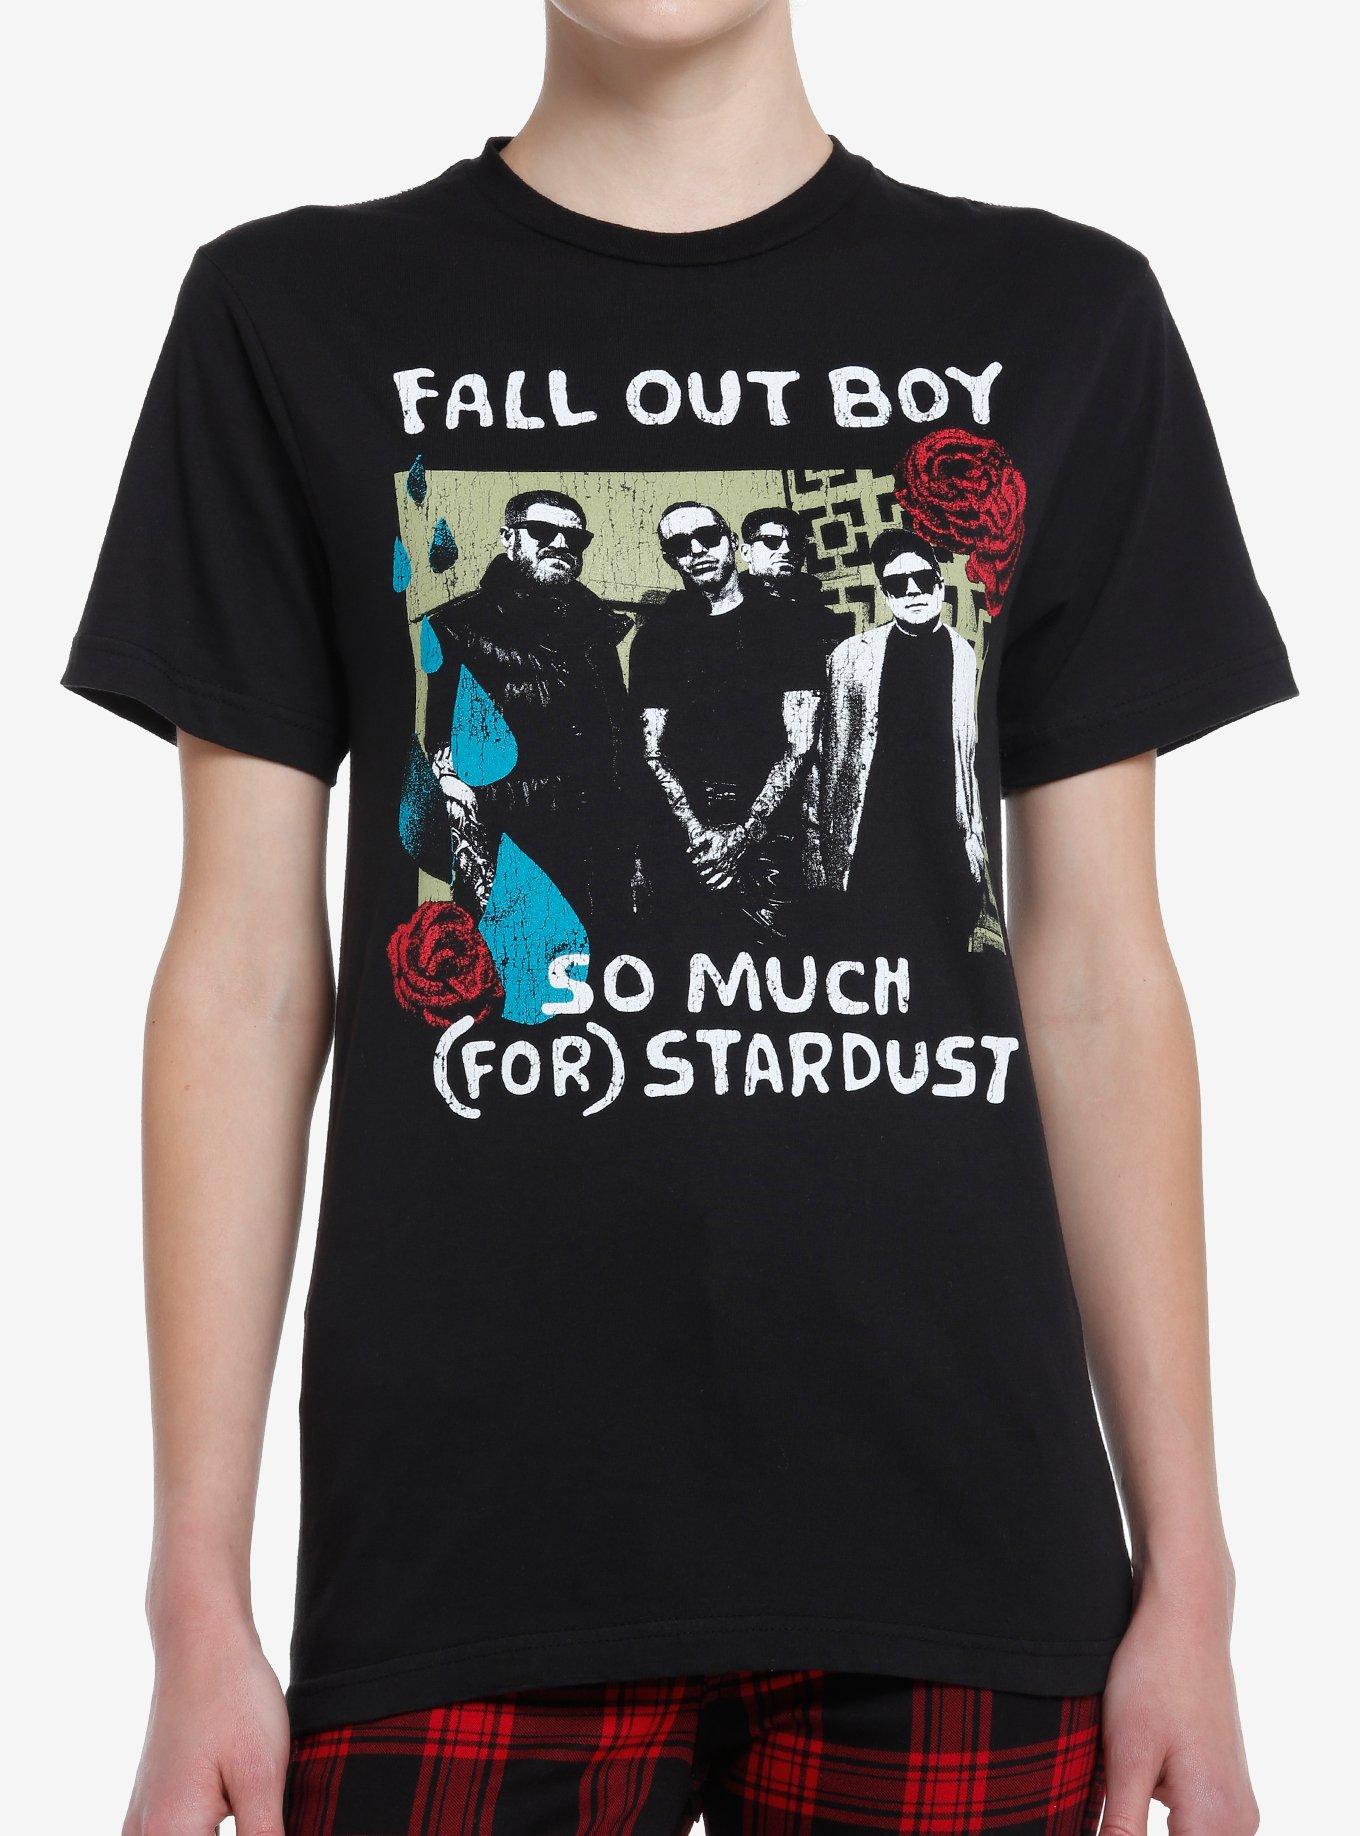 Fall Out Boy So Much (For) Stardust Group Photo Boyfriend Fit Girls T-Shirt, BLACK, hi-res